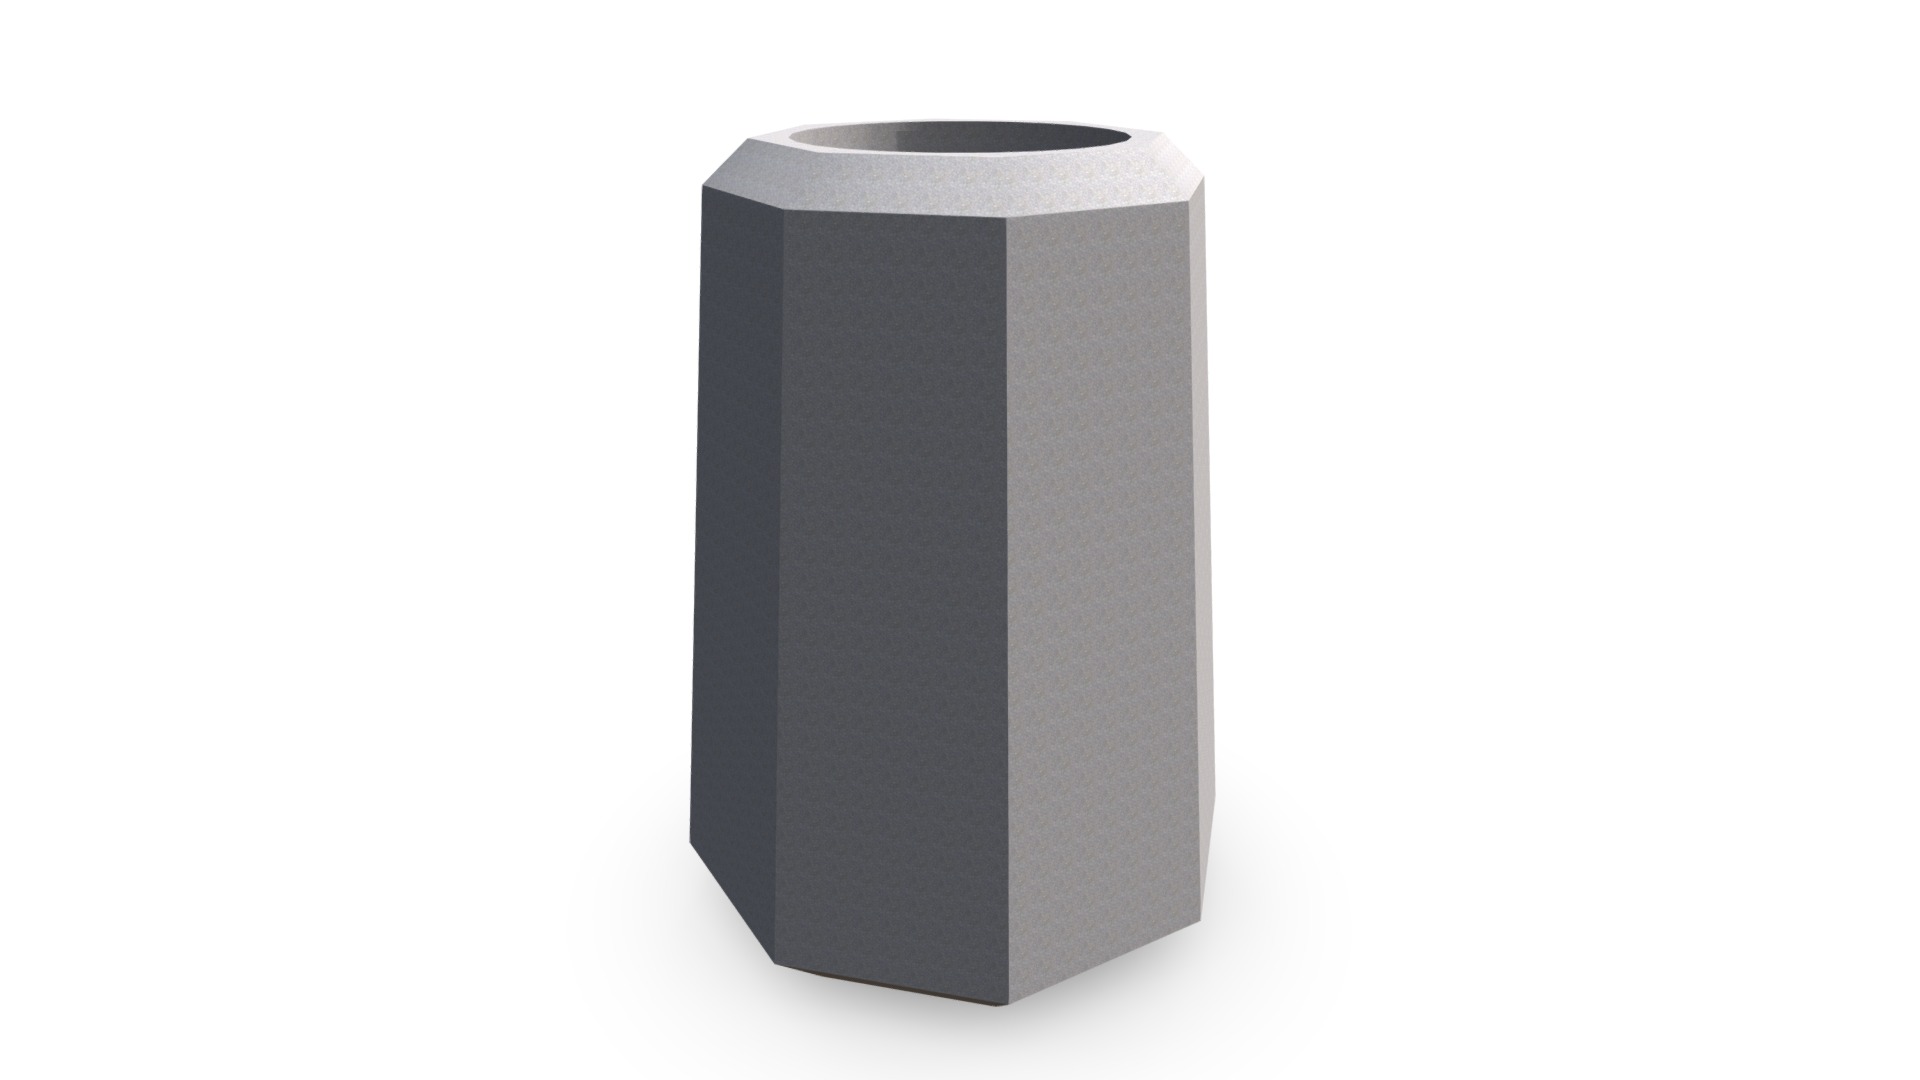 3D model UB-06 - This is a 3D model of the UB-06. The 3D model is about a black rectangular object.